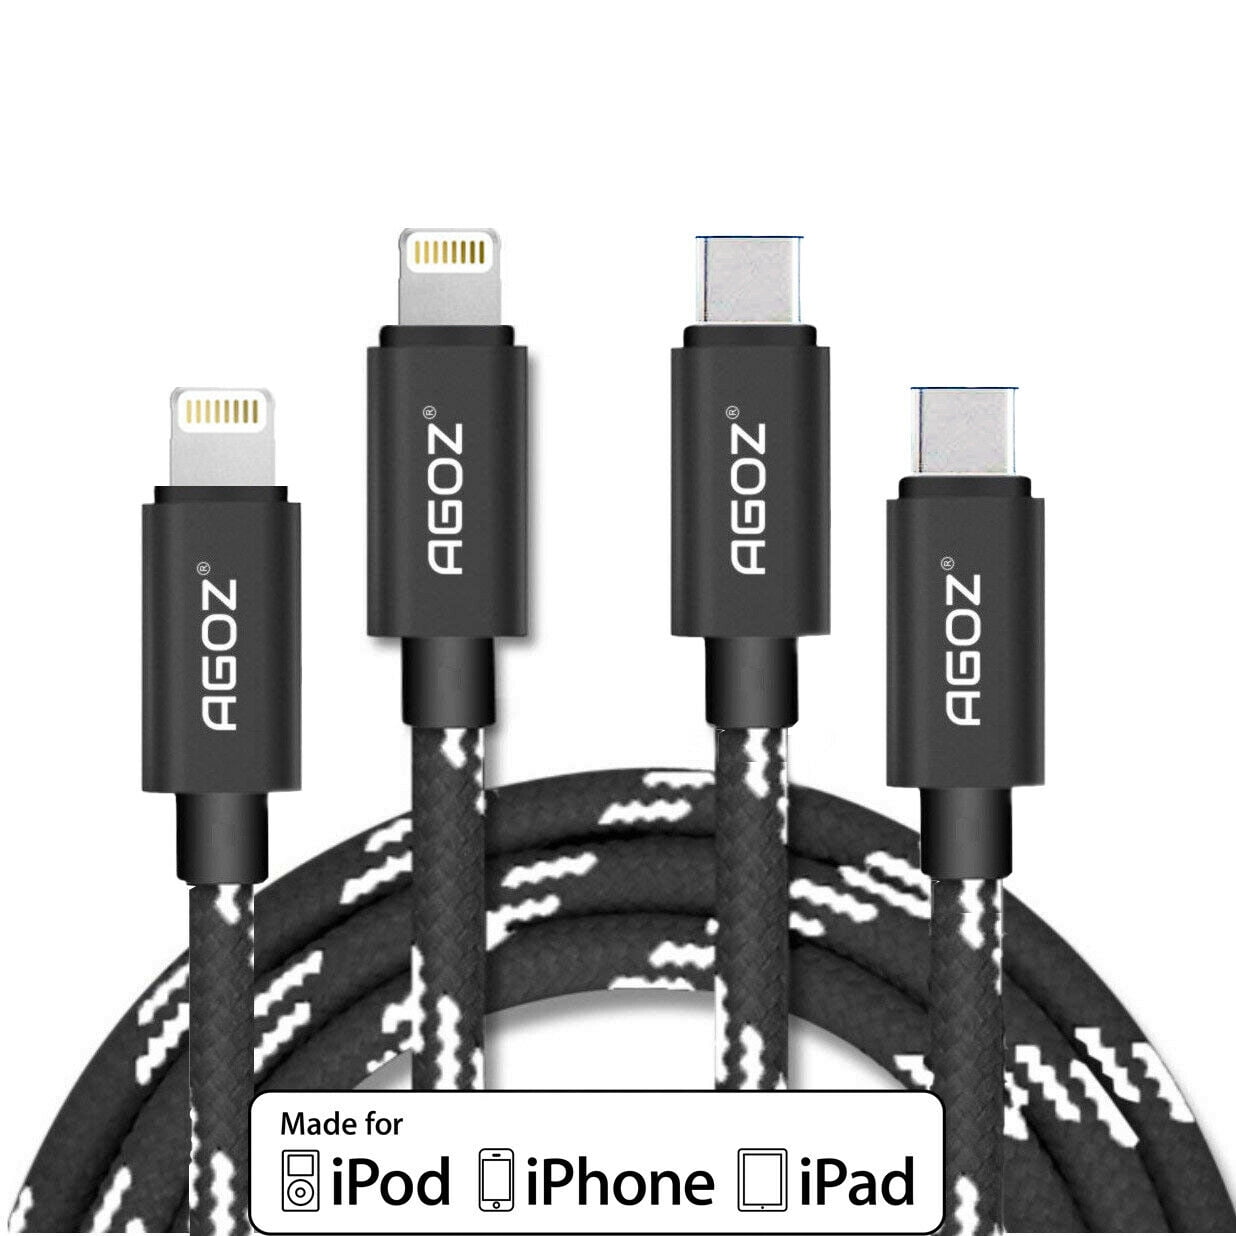 2Pack Long Lightning Cable 10 Foot Apple MFi Certified iPhone Charger Cable 10ft High Fast/Data Sync 10 Feet Apple Charging Cable Cord for Apple iPhone 13/12/11 Pro/11/XS MAX/XR/8/7/6s/6/Plus/5,iPad 